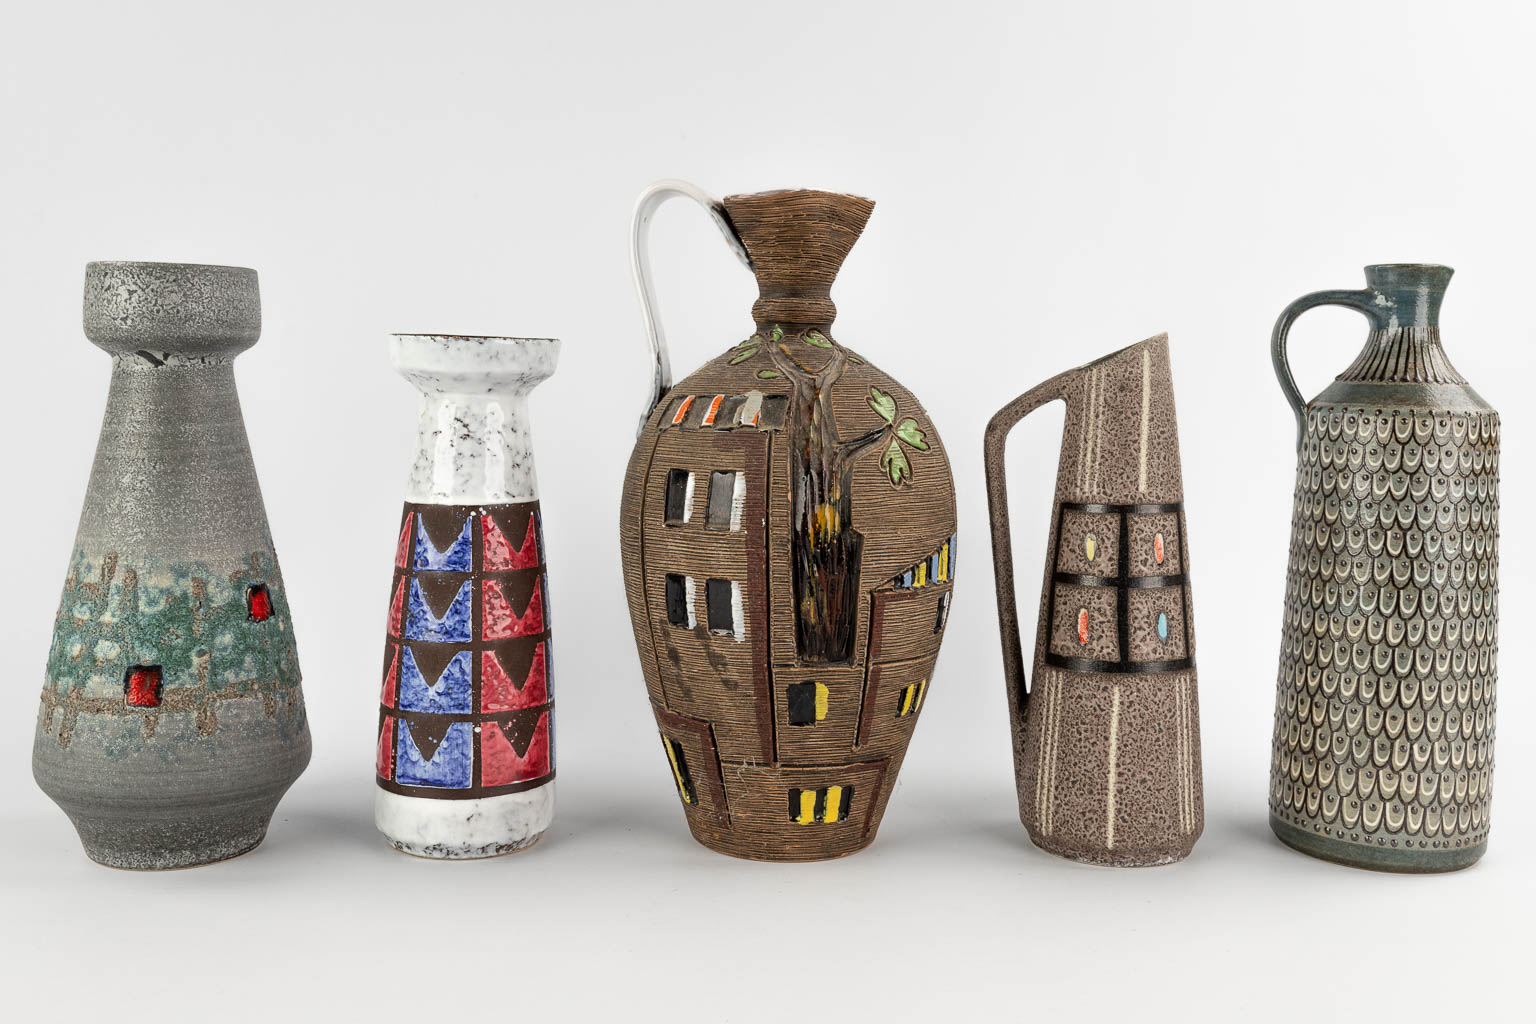 A collection of mid-century ceramics, West Germany. (H:36 x D:17 cm)